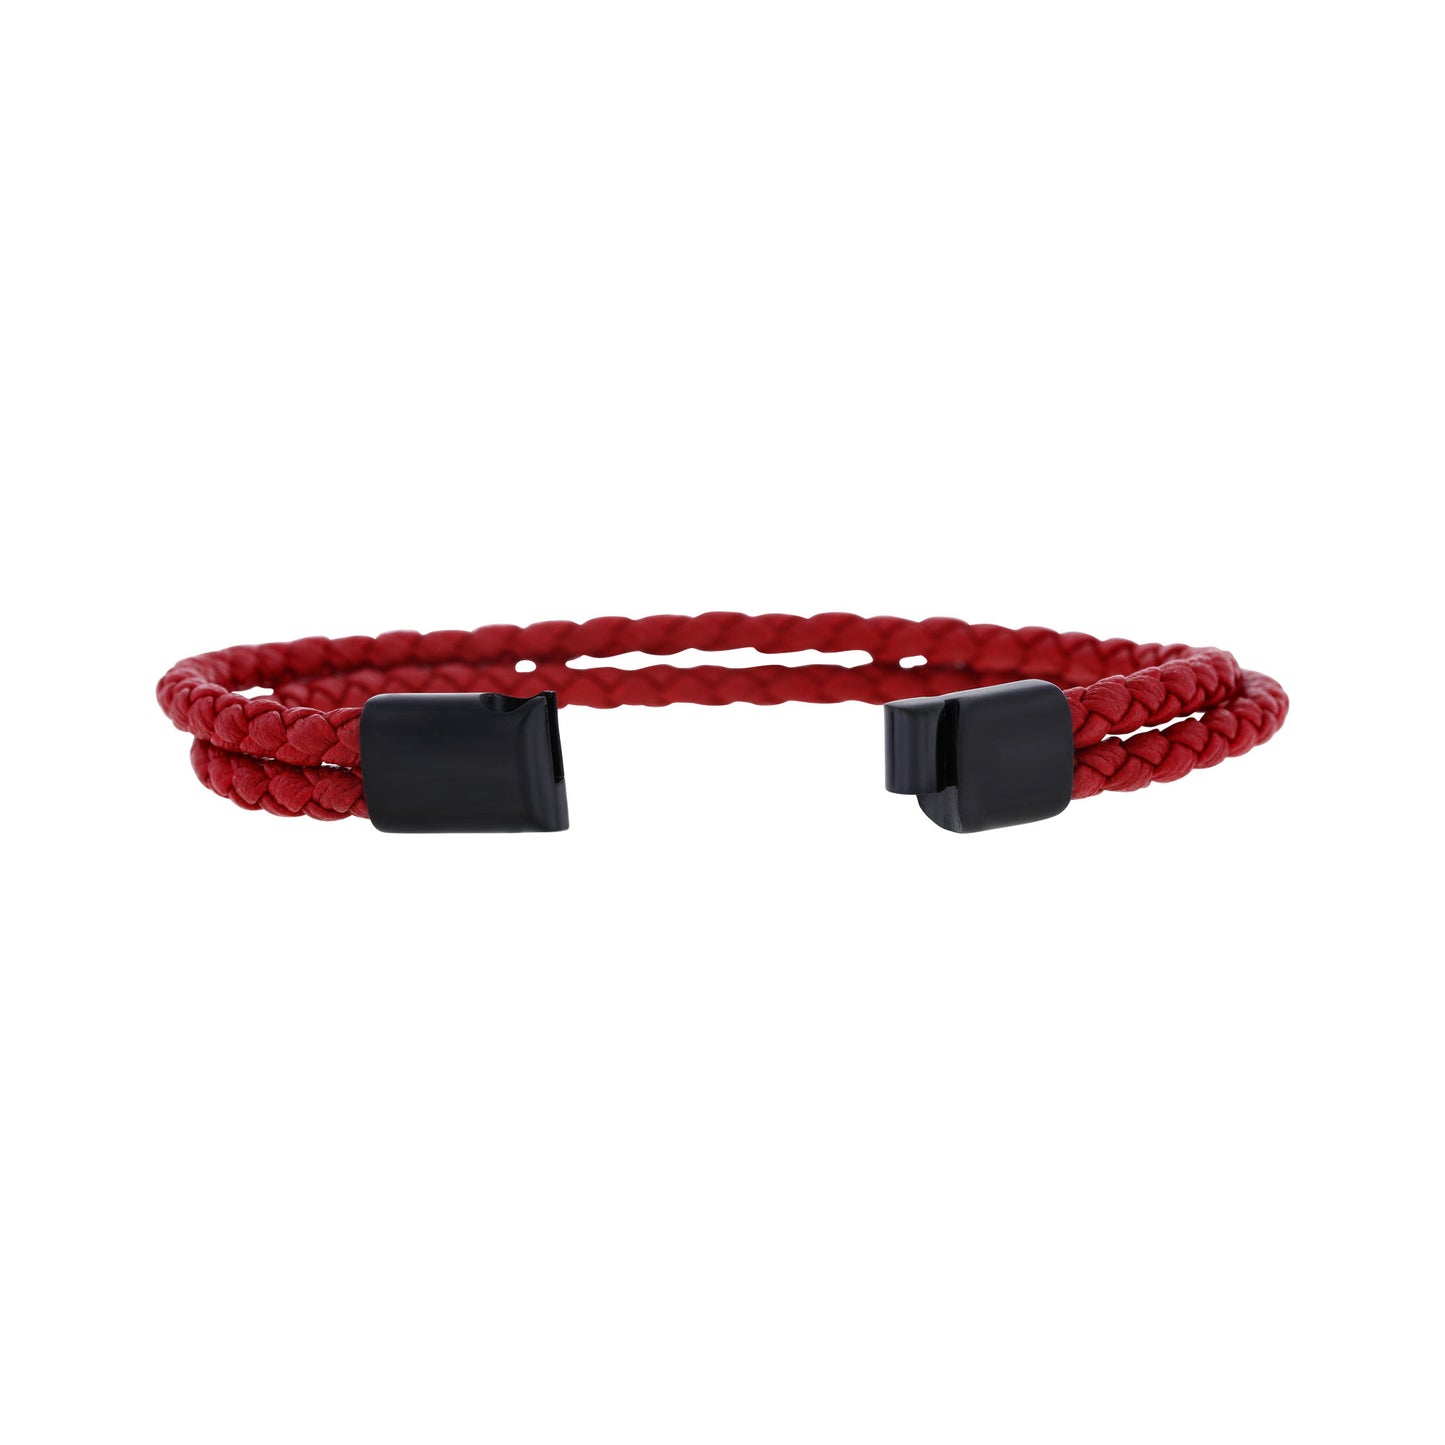 Zane Stainless Steel and Leather Bracelet